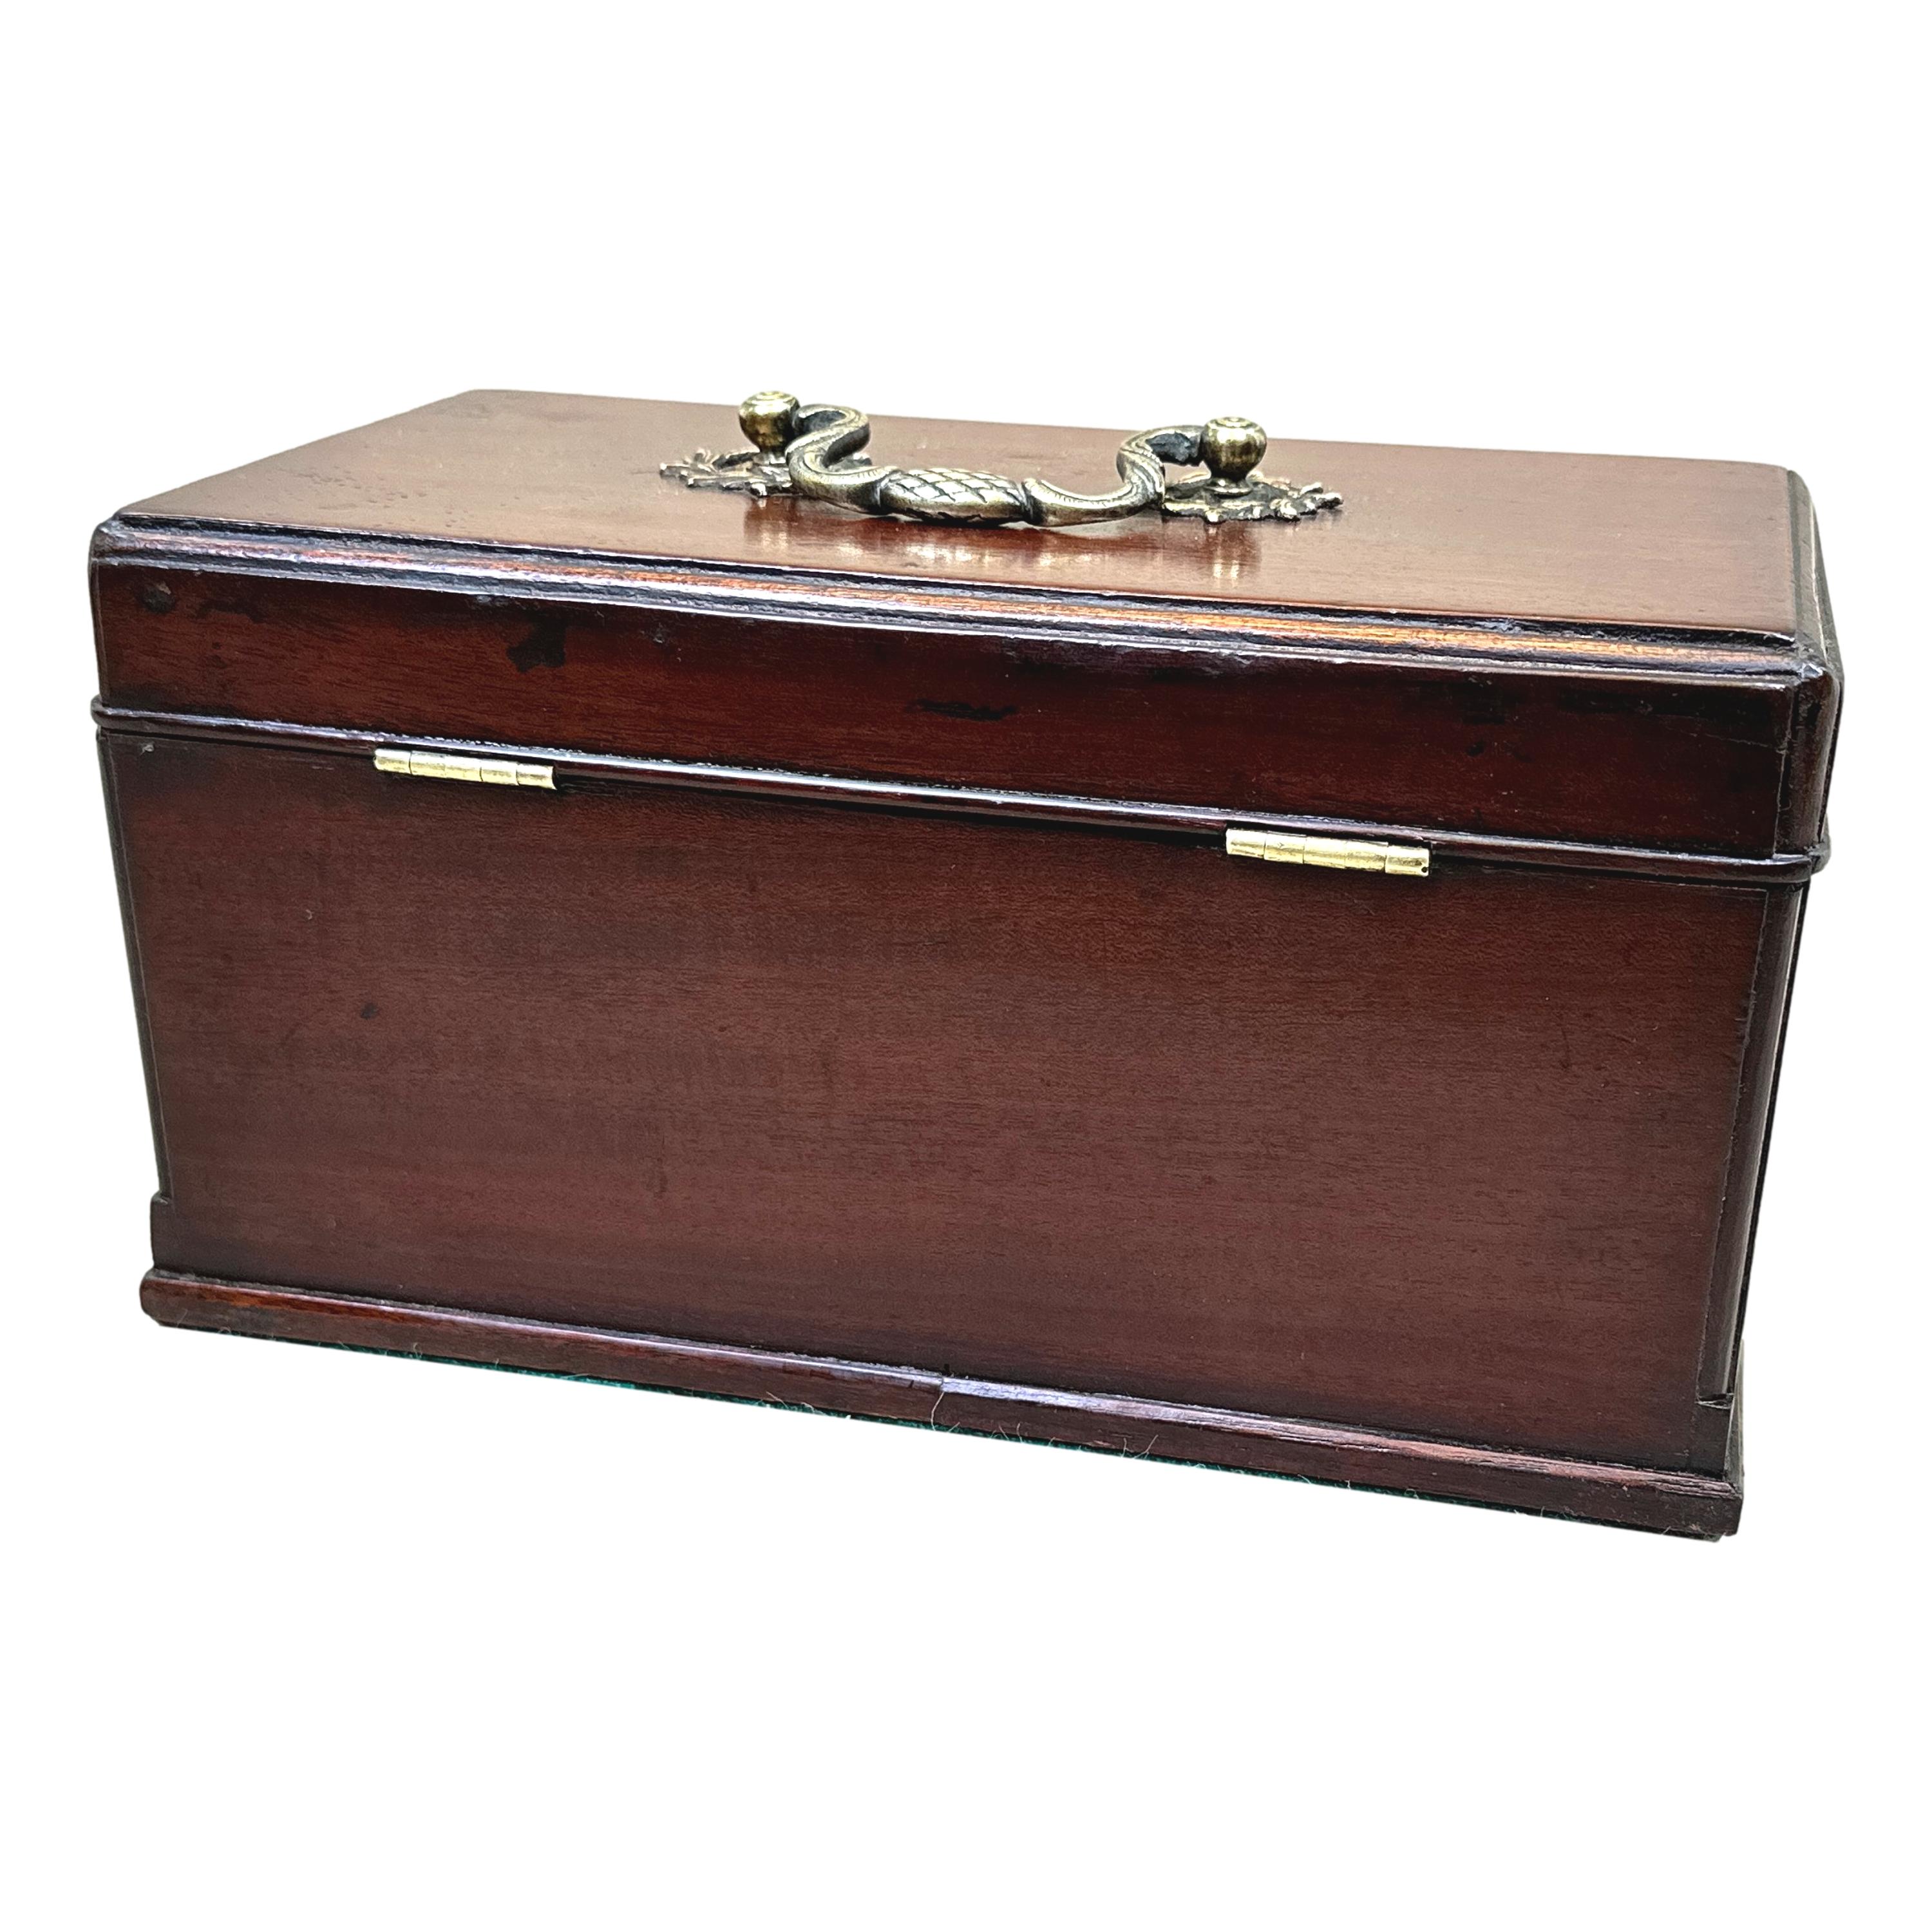 George III Period Mahogany Tea Caddy In Good Condition For Sale In Bedfordshire, GB